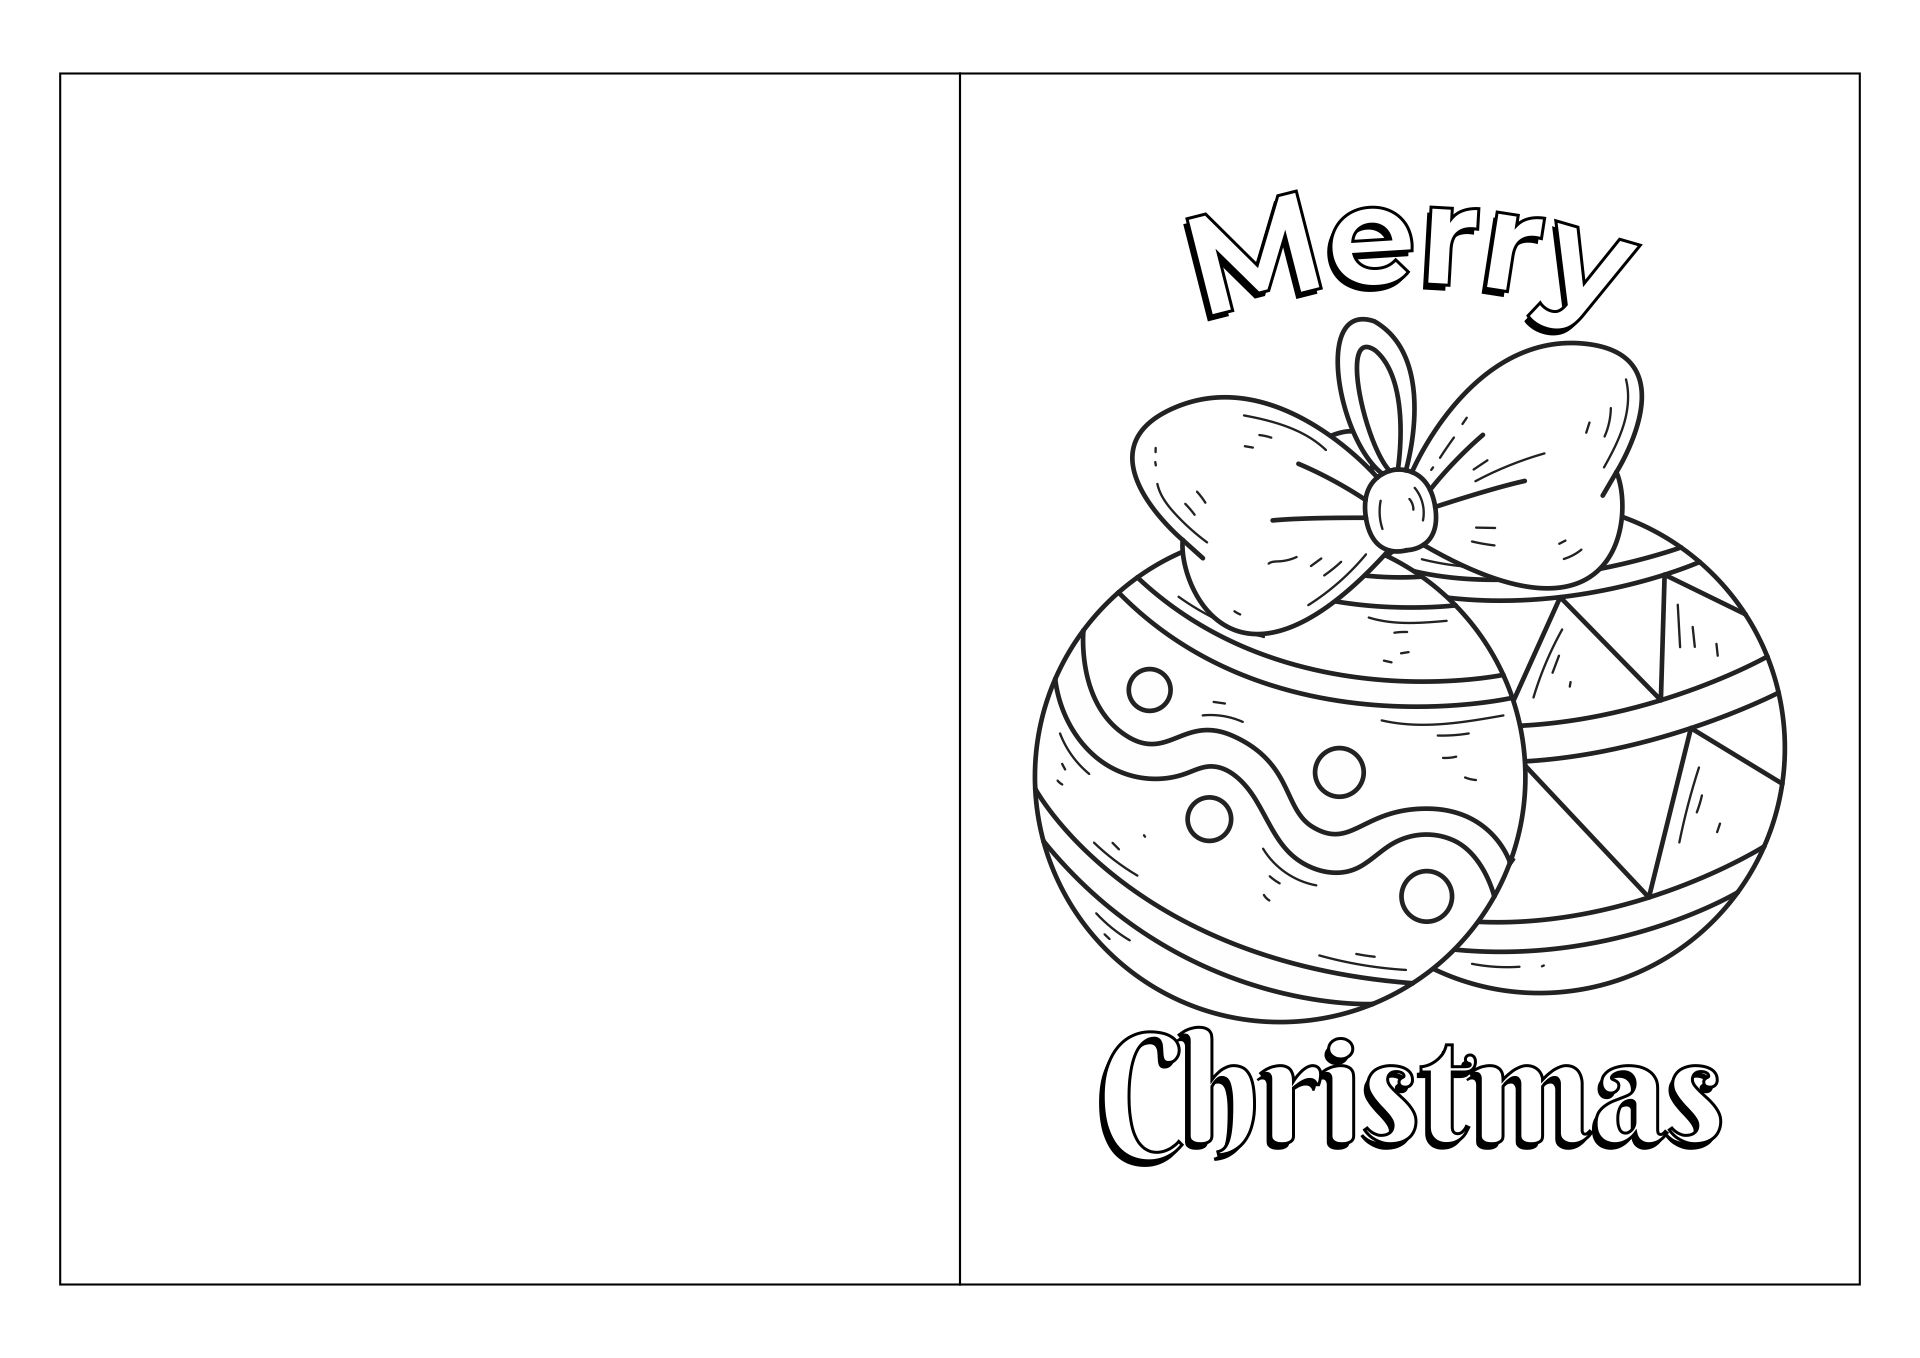 Christian Christmas Coloring Pages For Kids